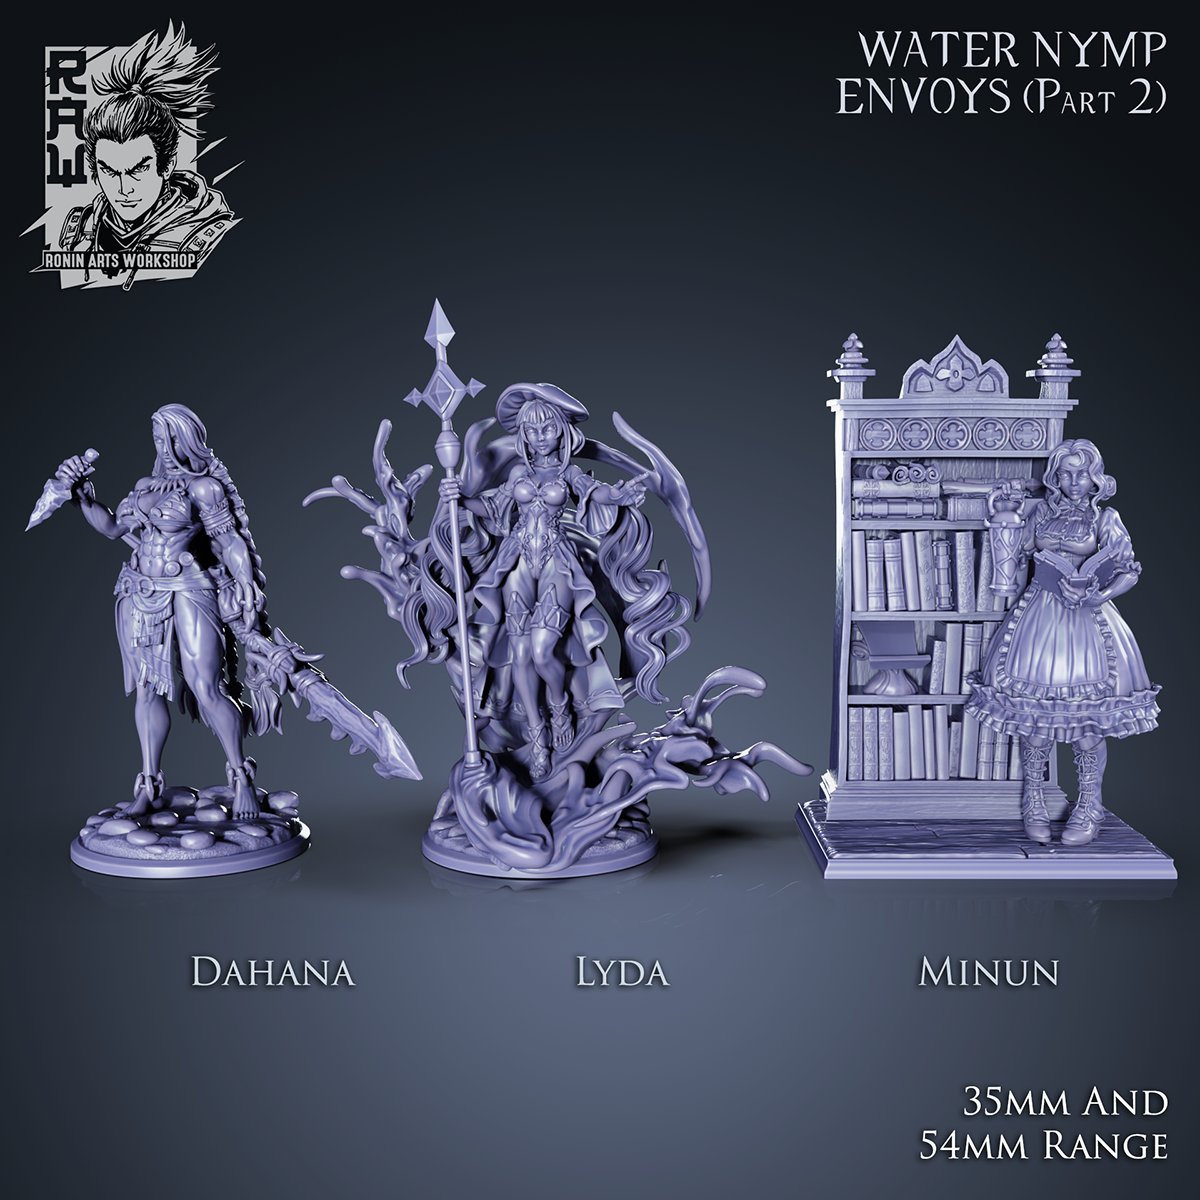 Dahana the Hunter, Lyda the Conjurer and Minun the Scholar form our new #Mermay package!  
Three more mermaids in their true and shapeshifted humanoid form! 
Who is your favorite 😉? 
#3dprinting #warmongers #3dprint #フィギュア #DnD #TRPG